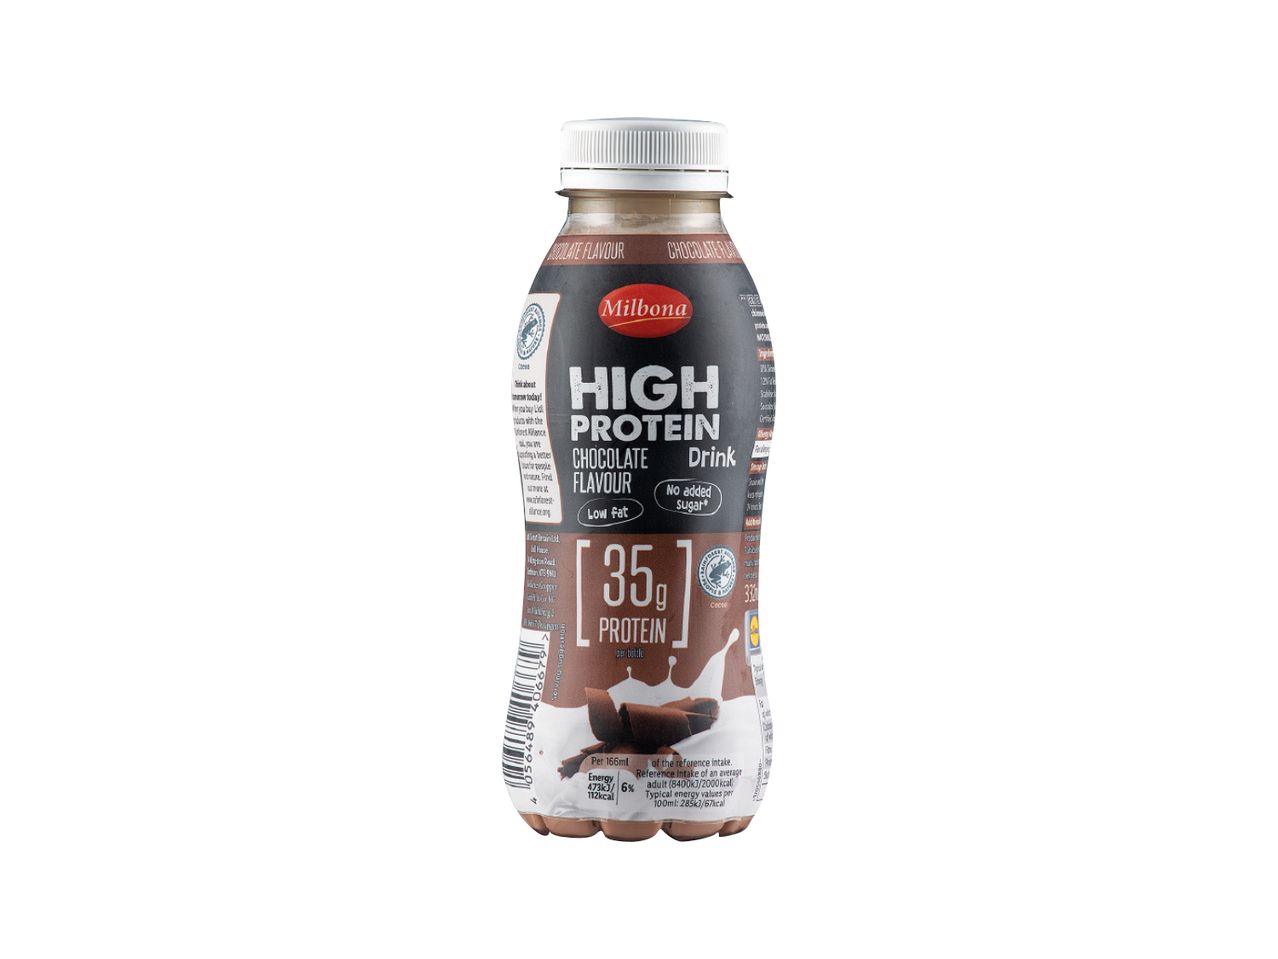 Go to full screen view: Milbona High Protein Drink Chocolate - Image 1